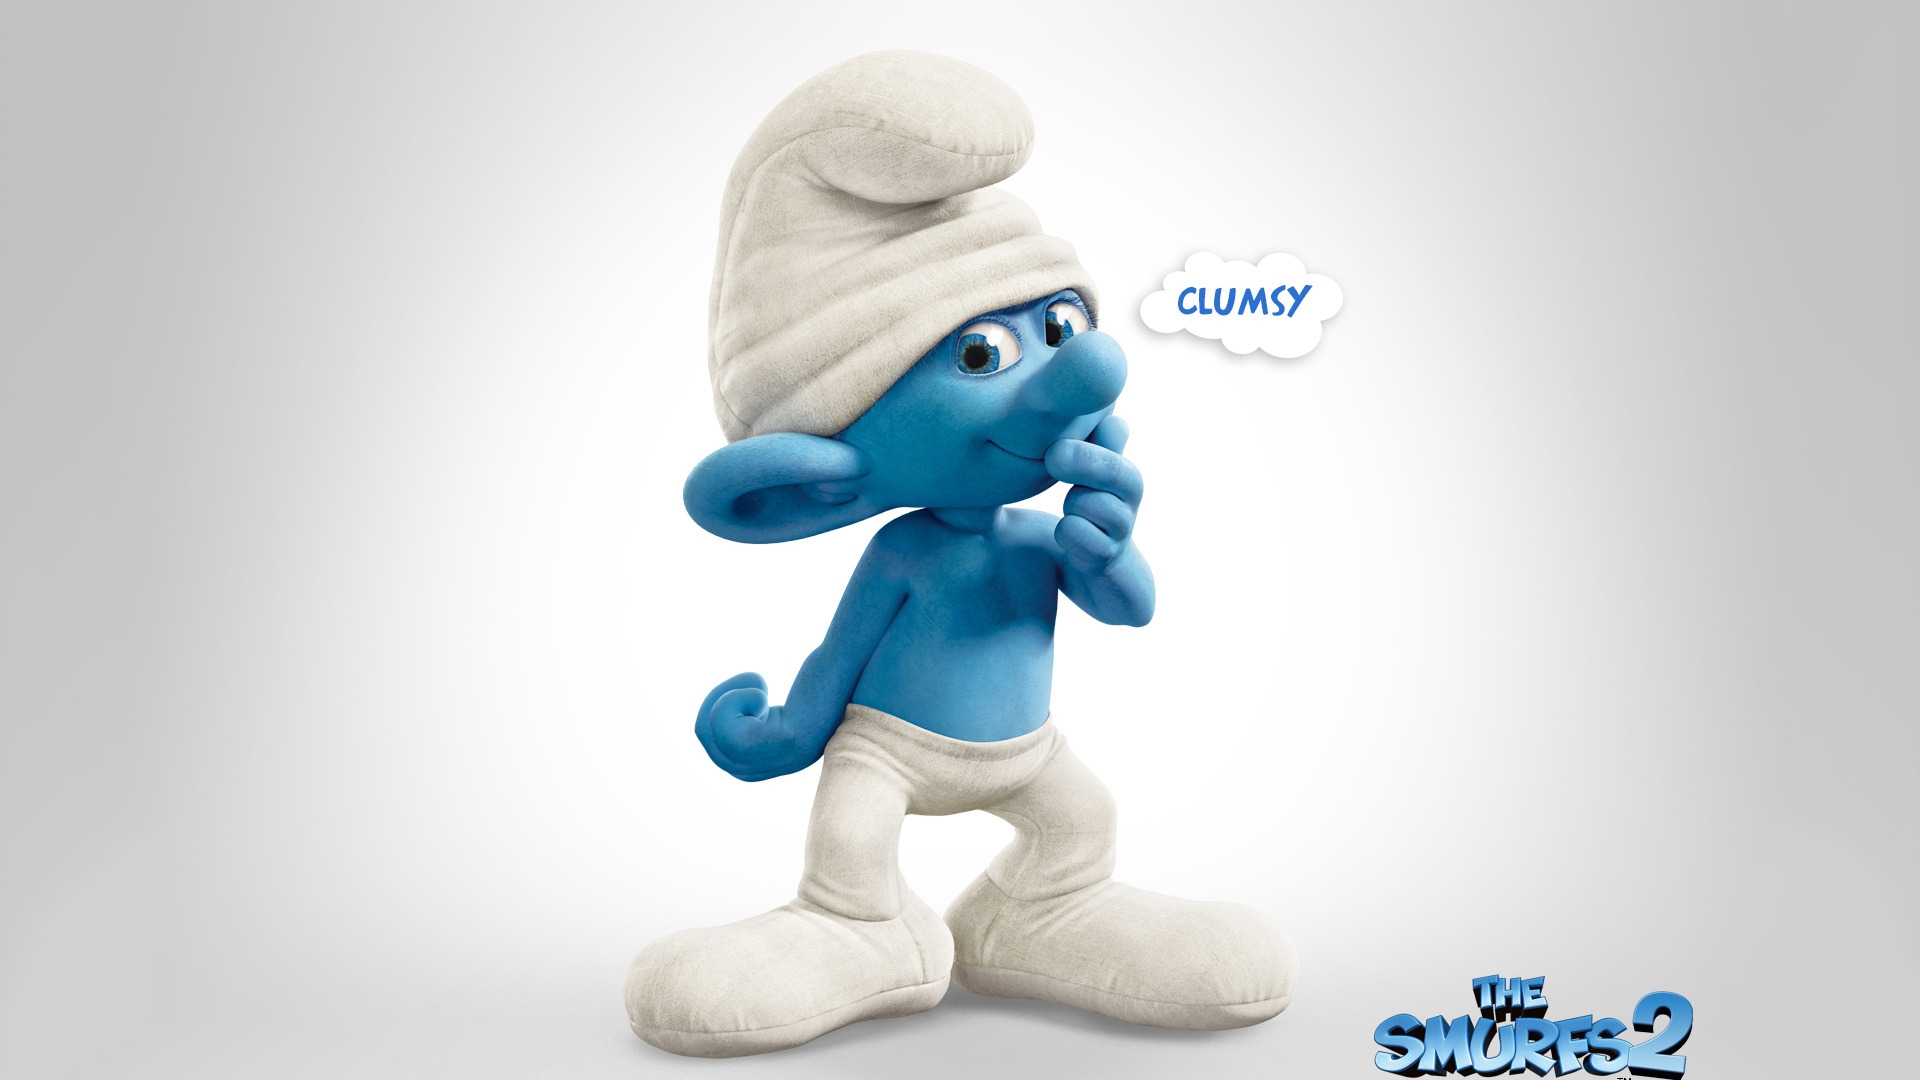 Clumsy The Smurfs 2 for 1920 x 1080 HDTV 1080p resolution